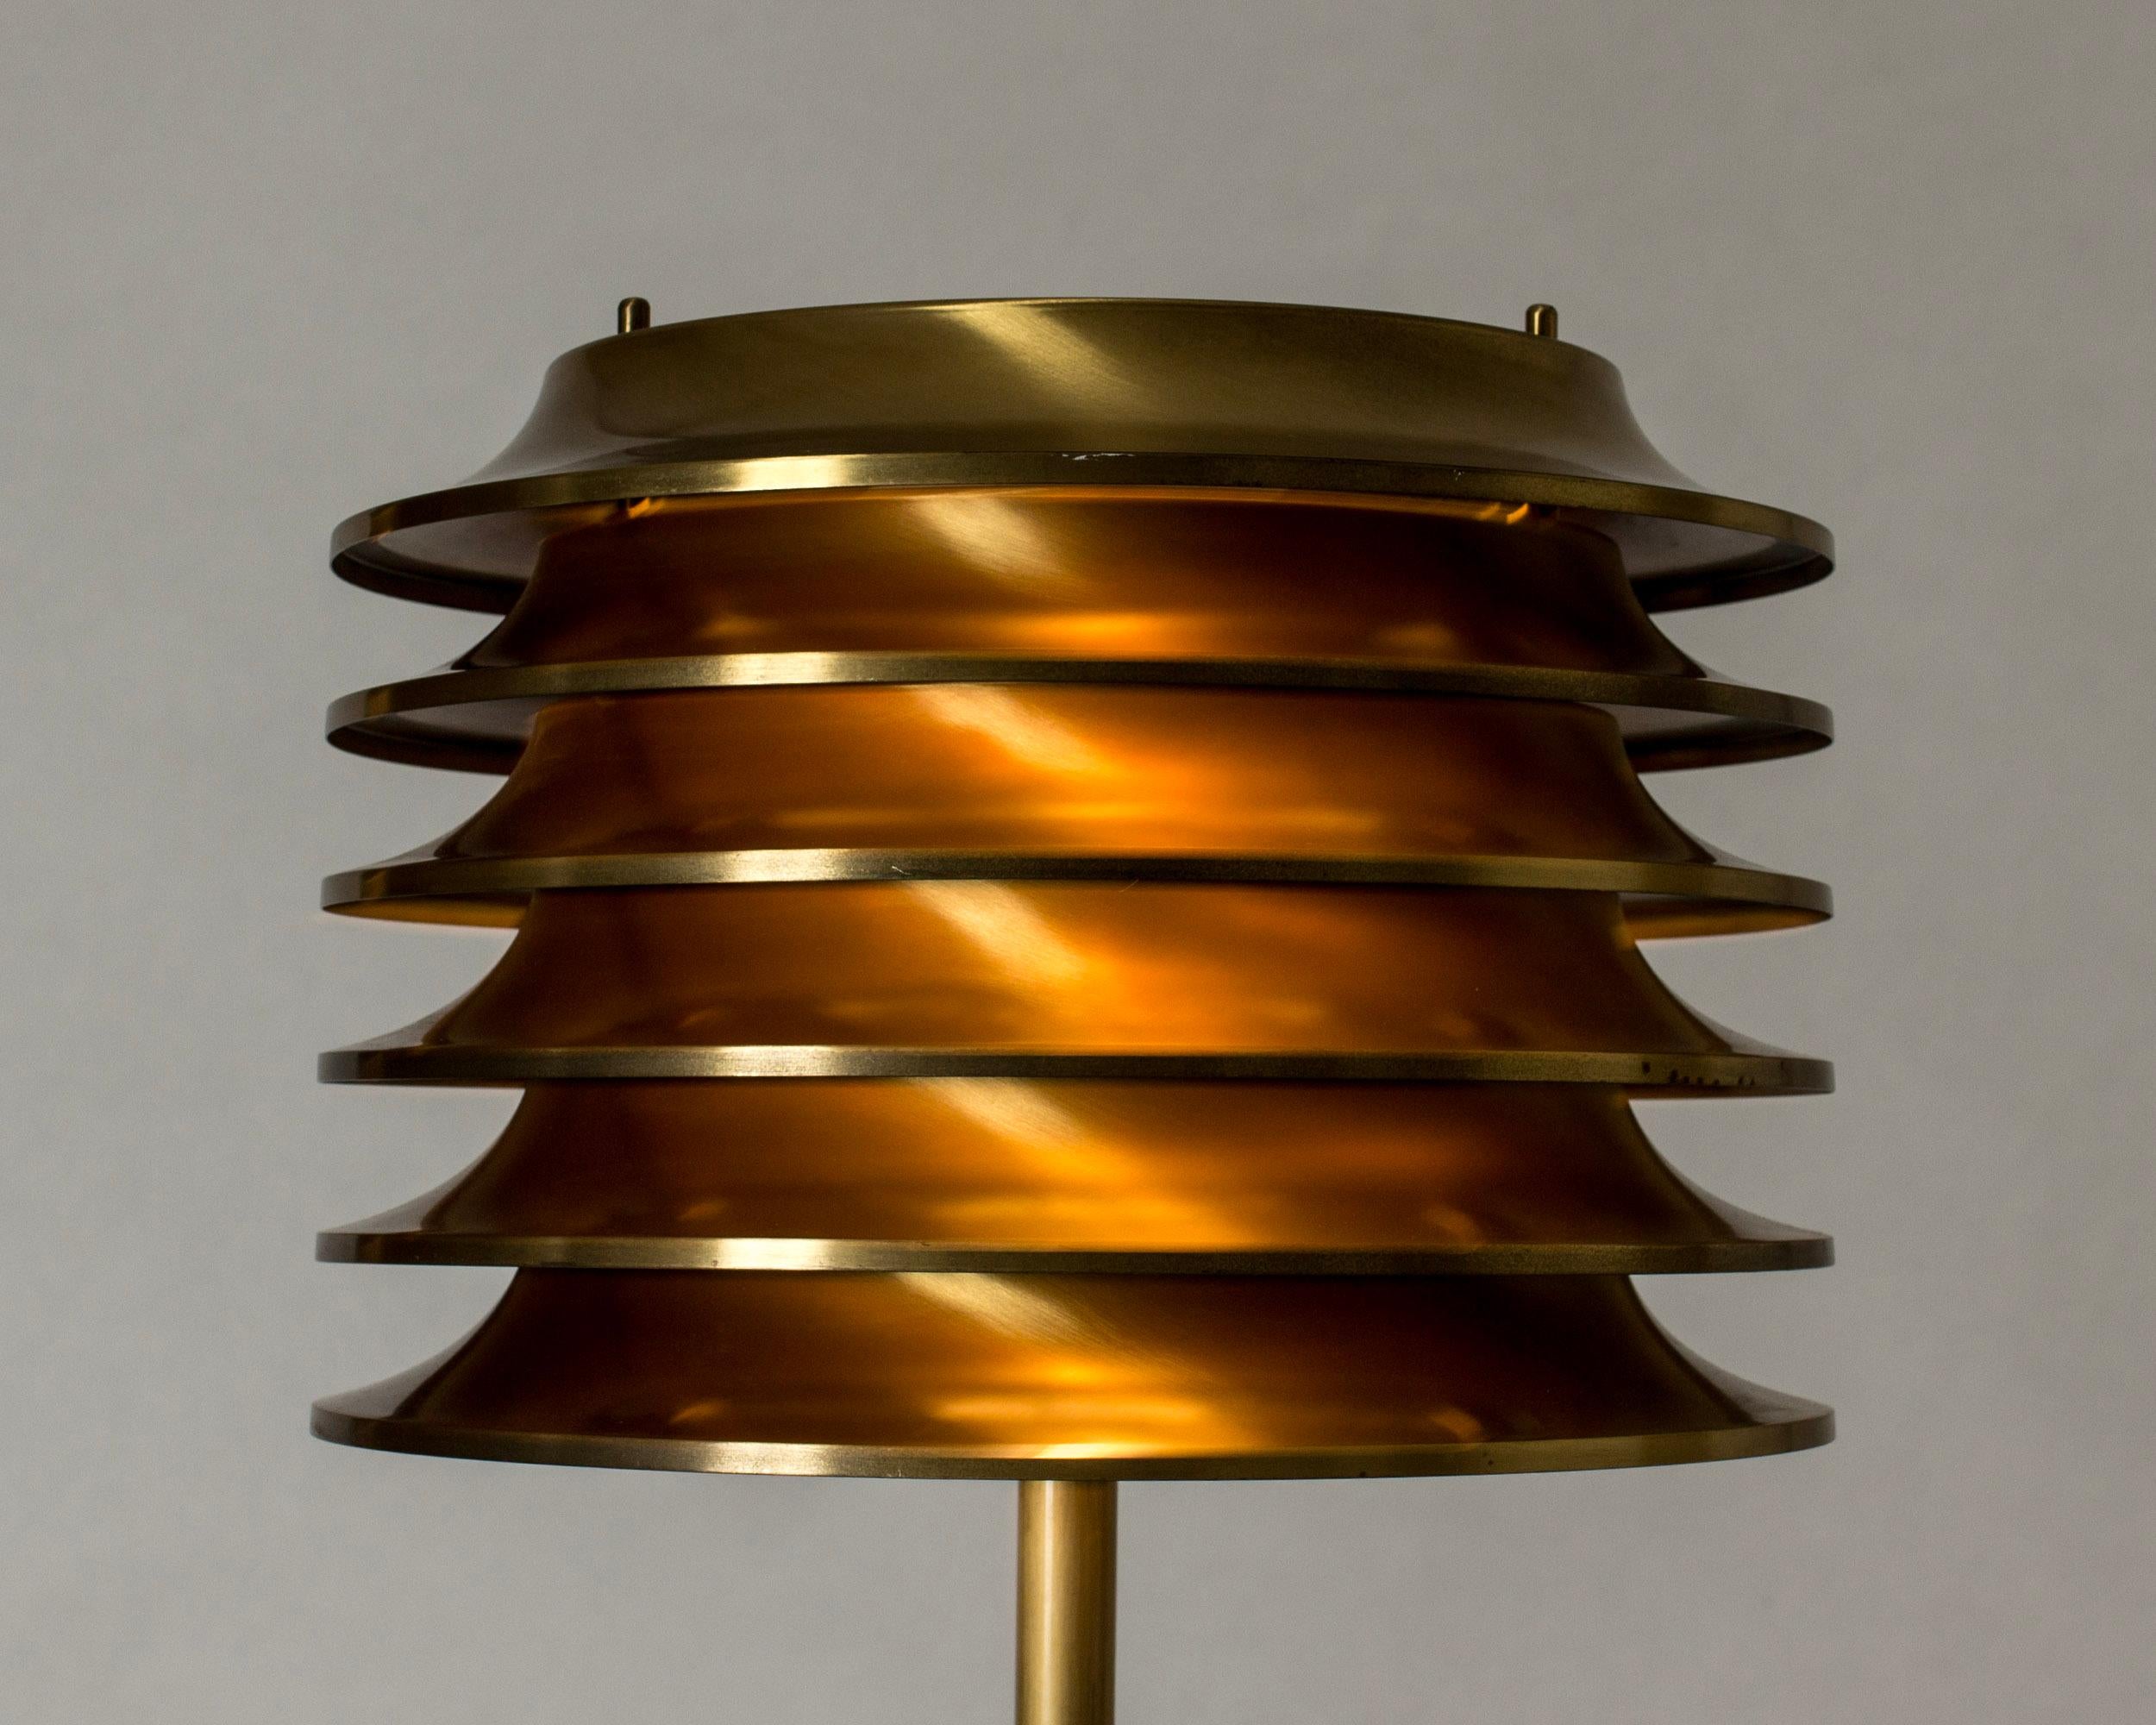 Finnish Midcentury Modern Brass Floor Lamp by Kai Ruokonen for Orno, 1970s In Good Condition For Sale In Stockholm, SE